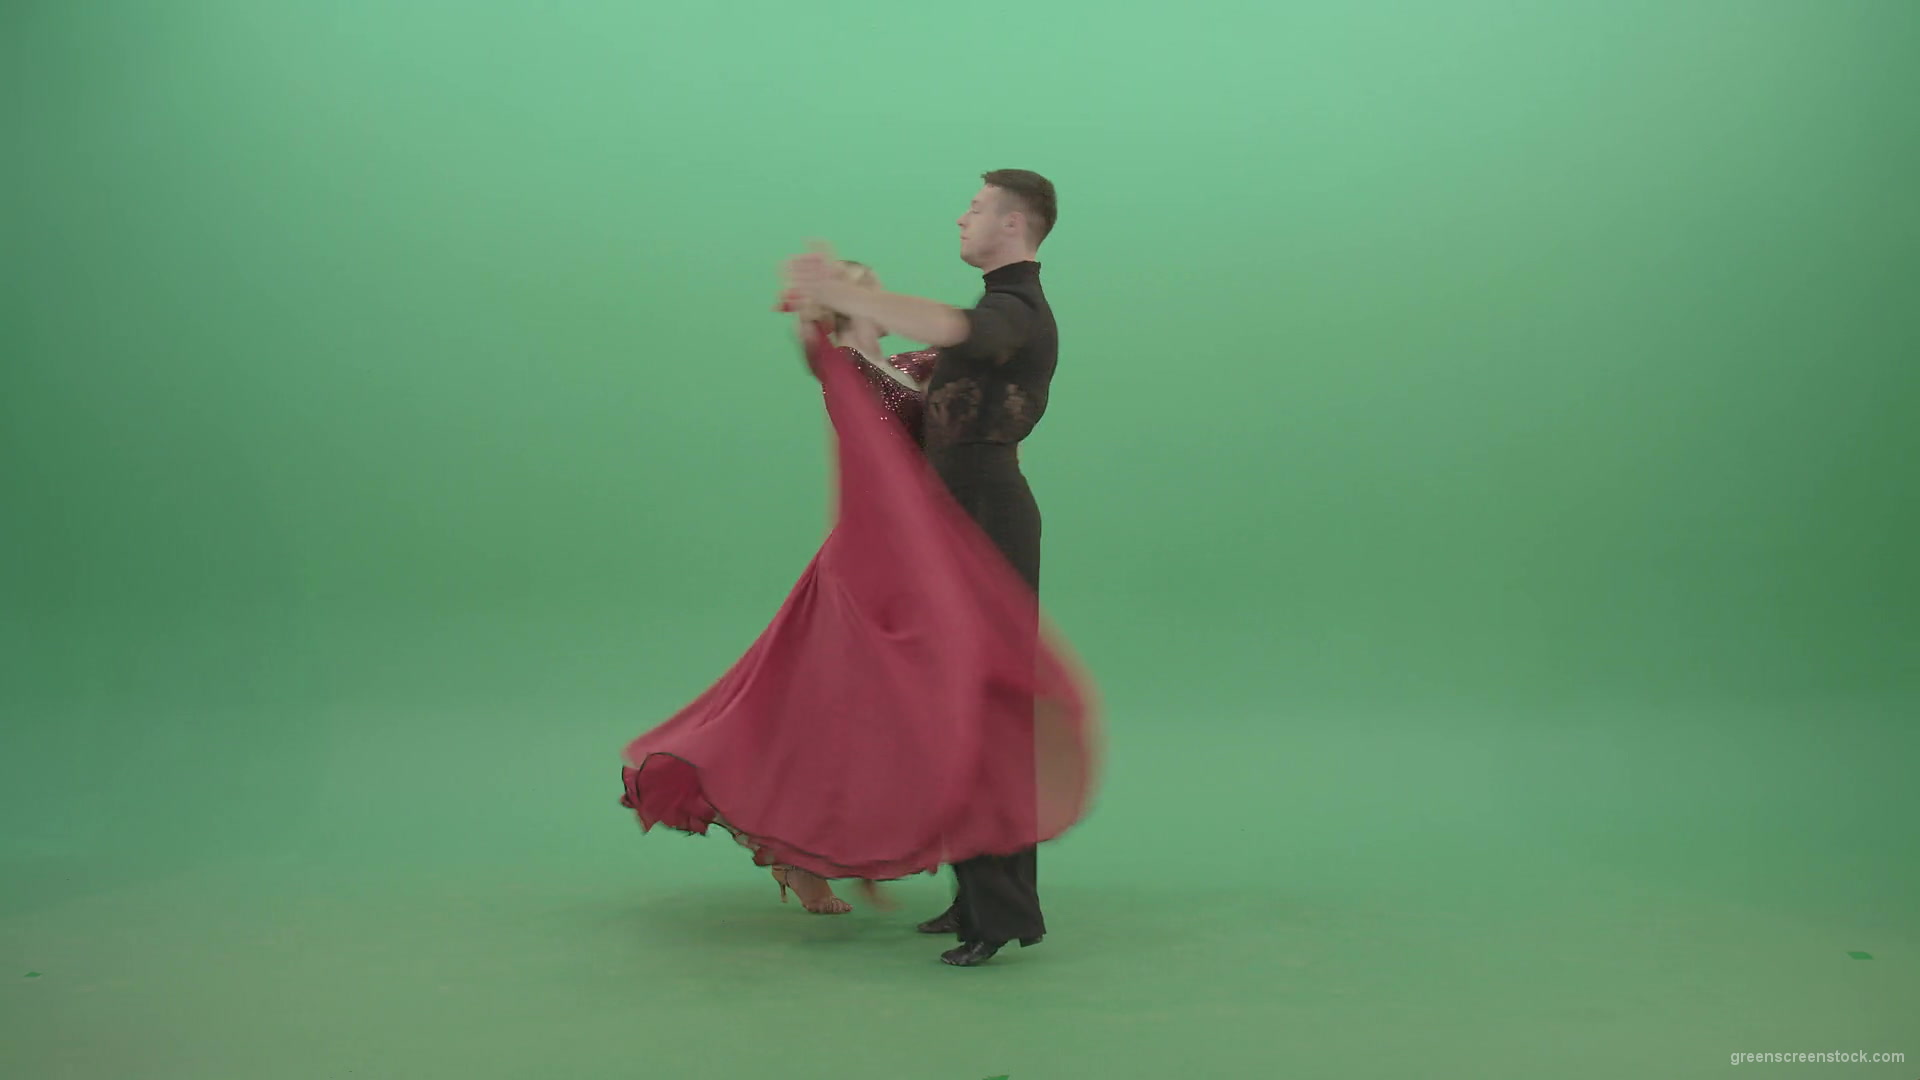 Young-couple-in-red-black-costume-spinning-dancing-ballroom-latina-dance-over-green-screen-4K-Video-Footage-1920_005 Green Screen Stock